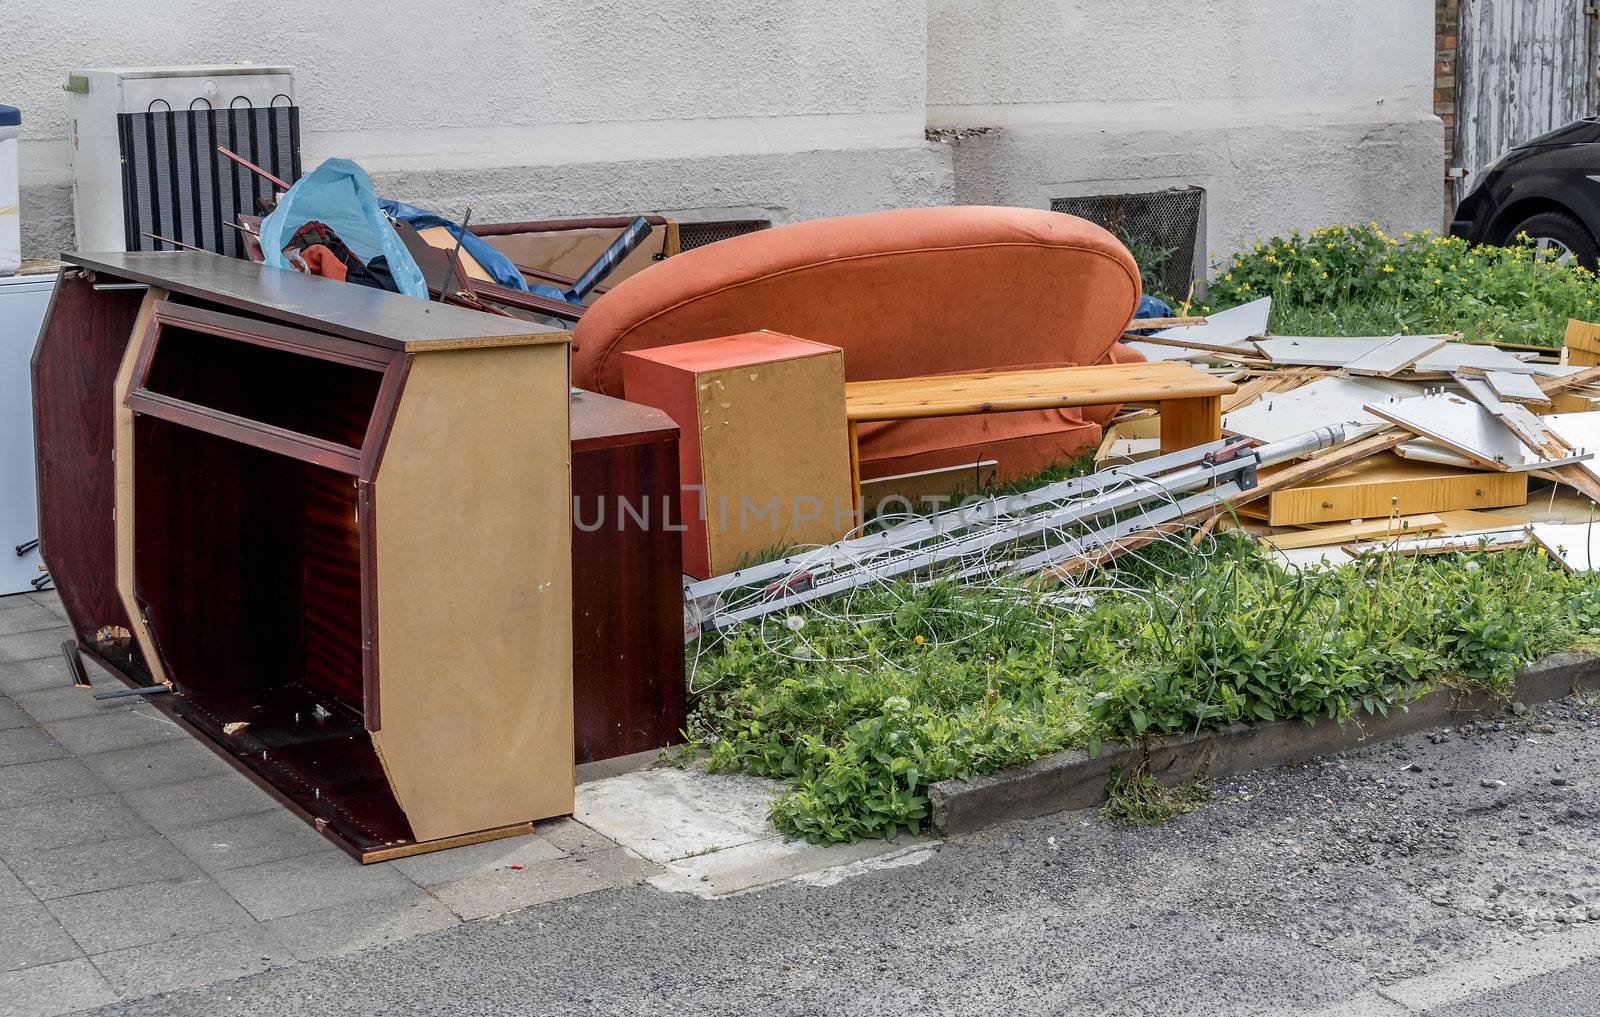 Bulky waste with cupboards, a sofa and furniture on the lawn in front of an apartment building, germany